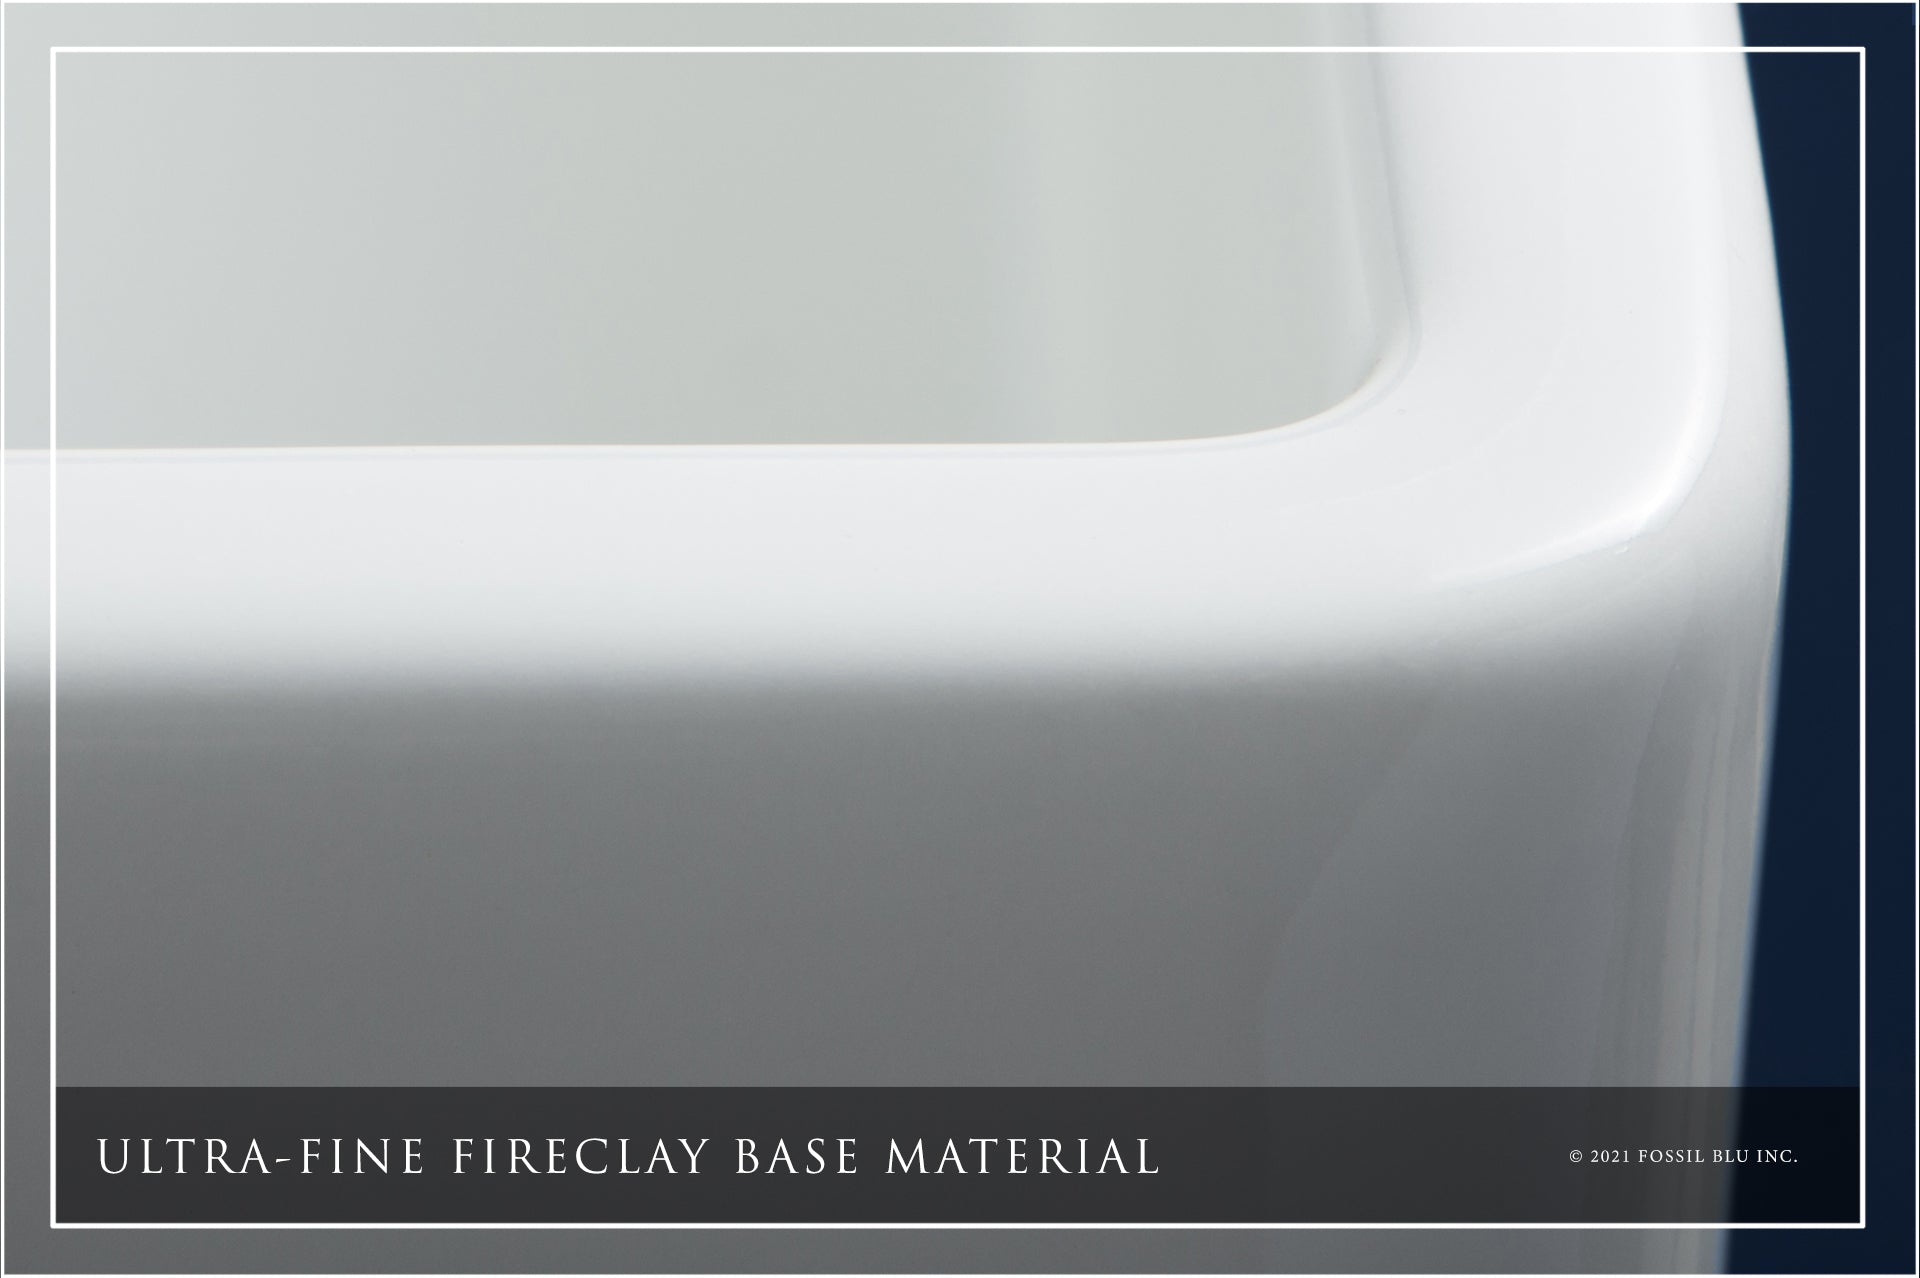 FSW1005PN LUXURY 30-INCH SOLID FIRECLAY FARMHOUSE SINK IN WHITE, POLISHED NICKEL ACCS, FLUTED FRONT